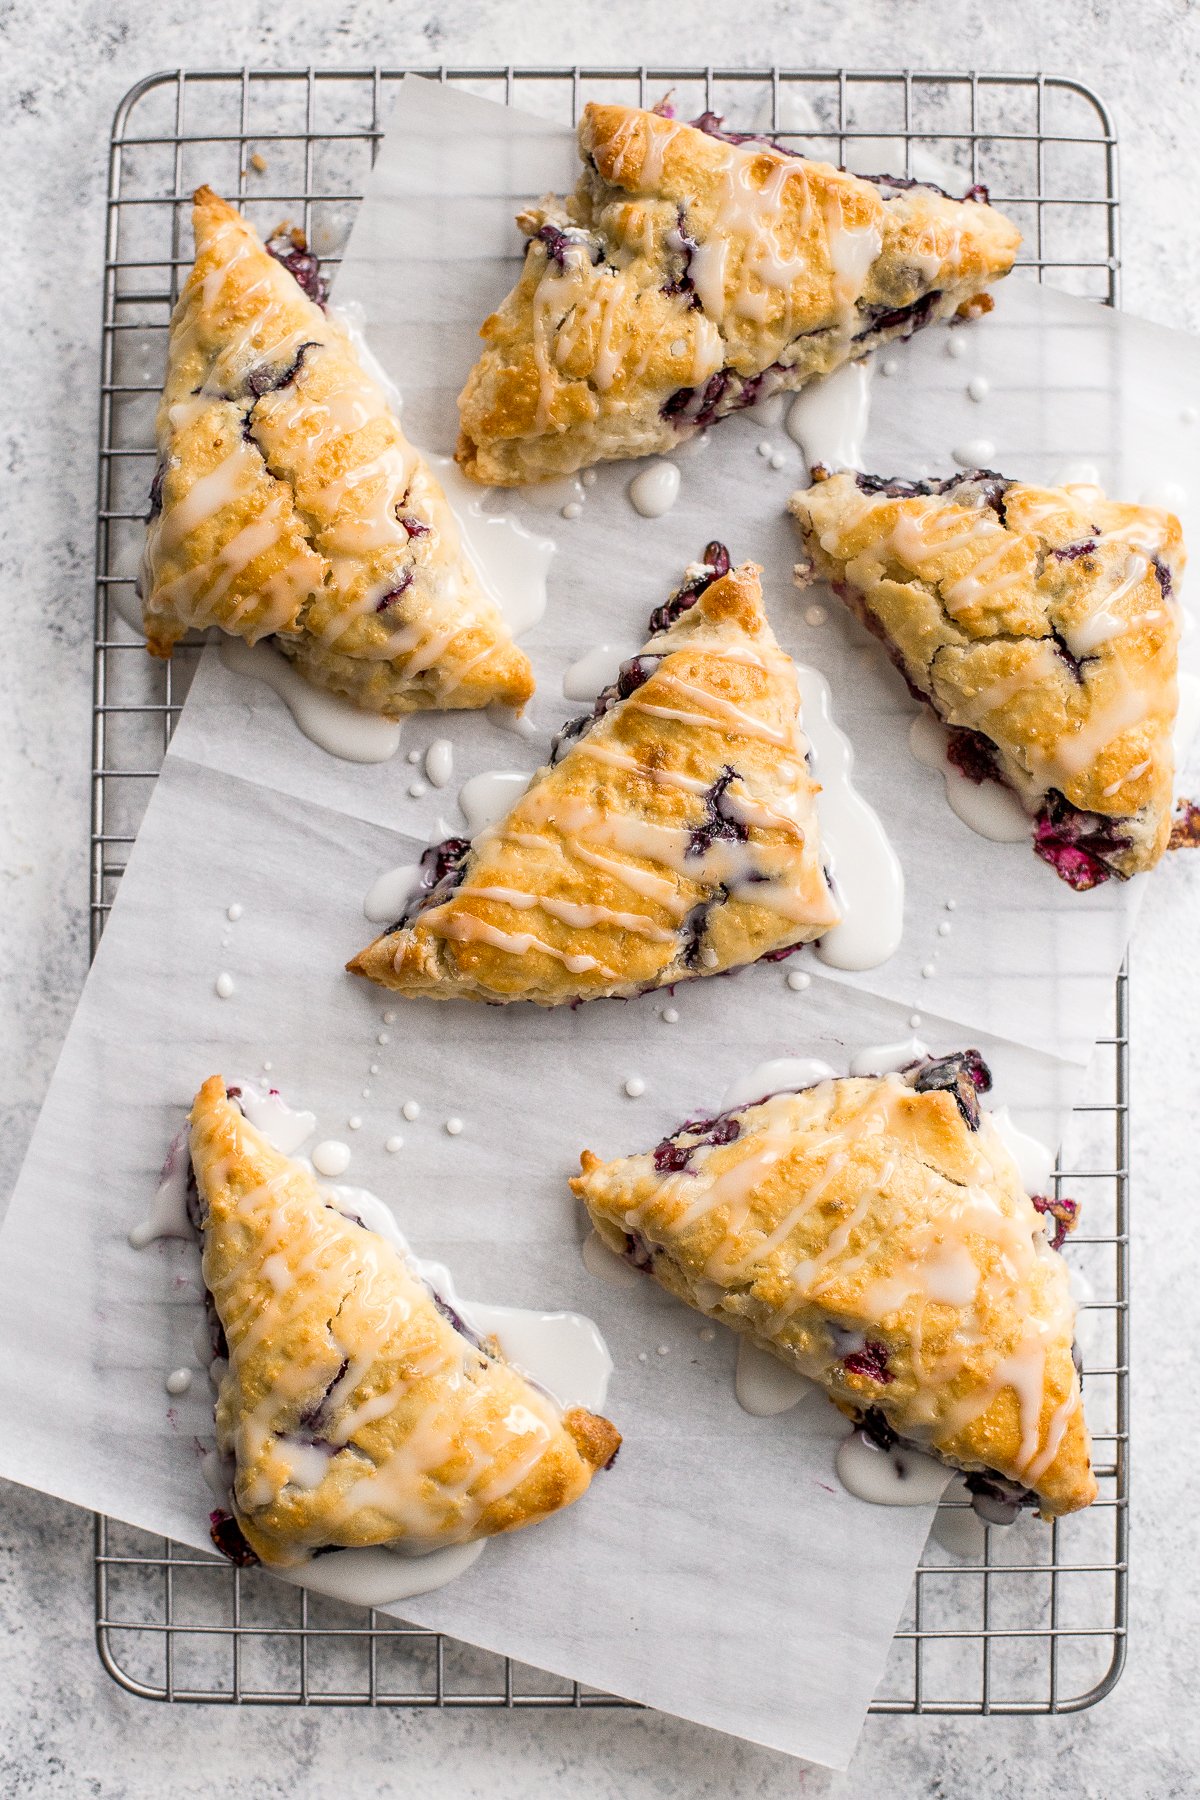 Glazed lemon blueberry scones are total breakfast goals! Blueberries and lemon partner together in a light, tender and flakey scone, drizzled with a sweet lemon glaze that is nothing short of impressive. | aheadofthyme.com